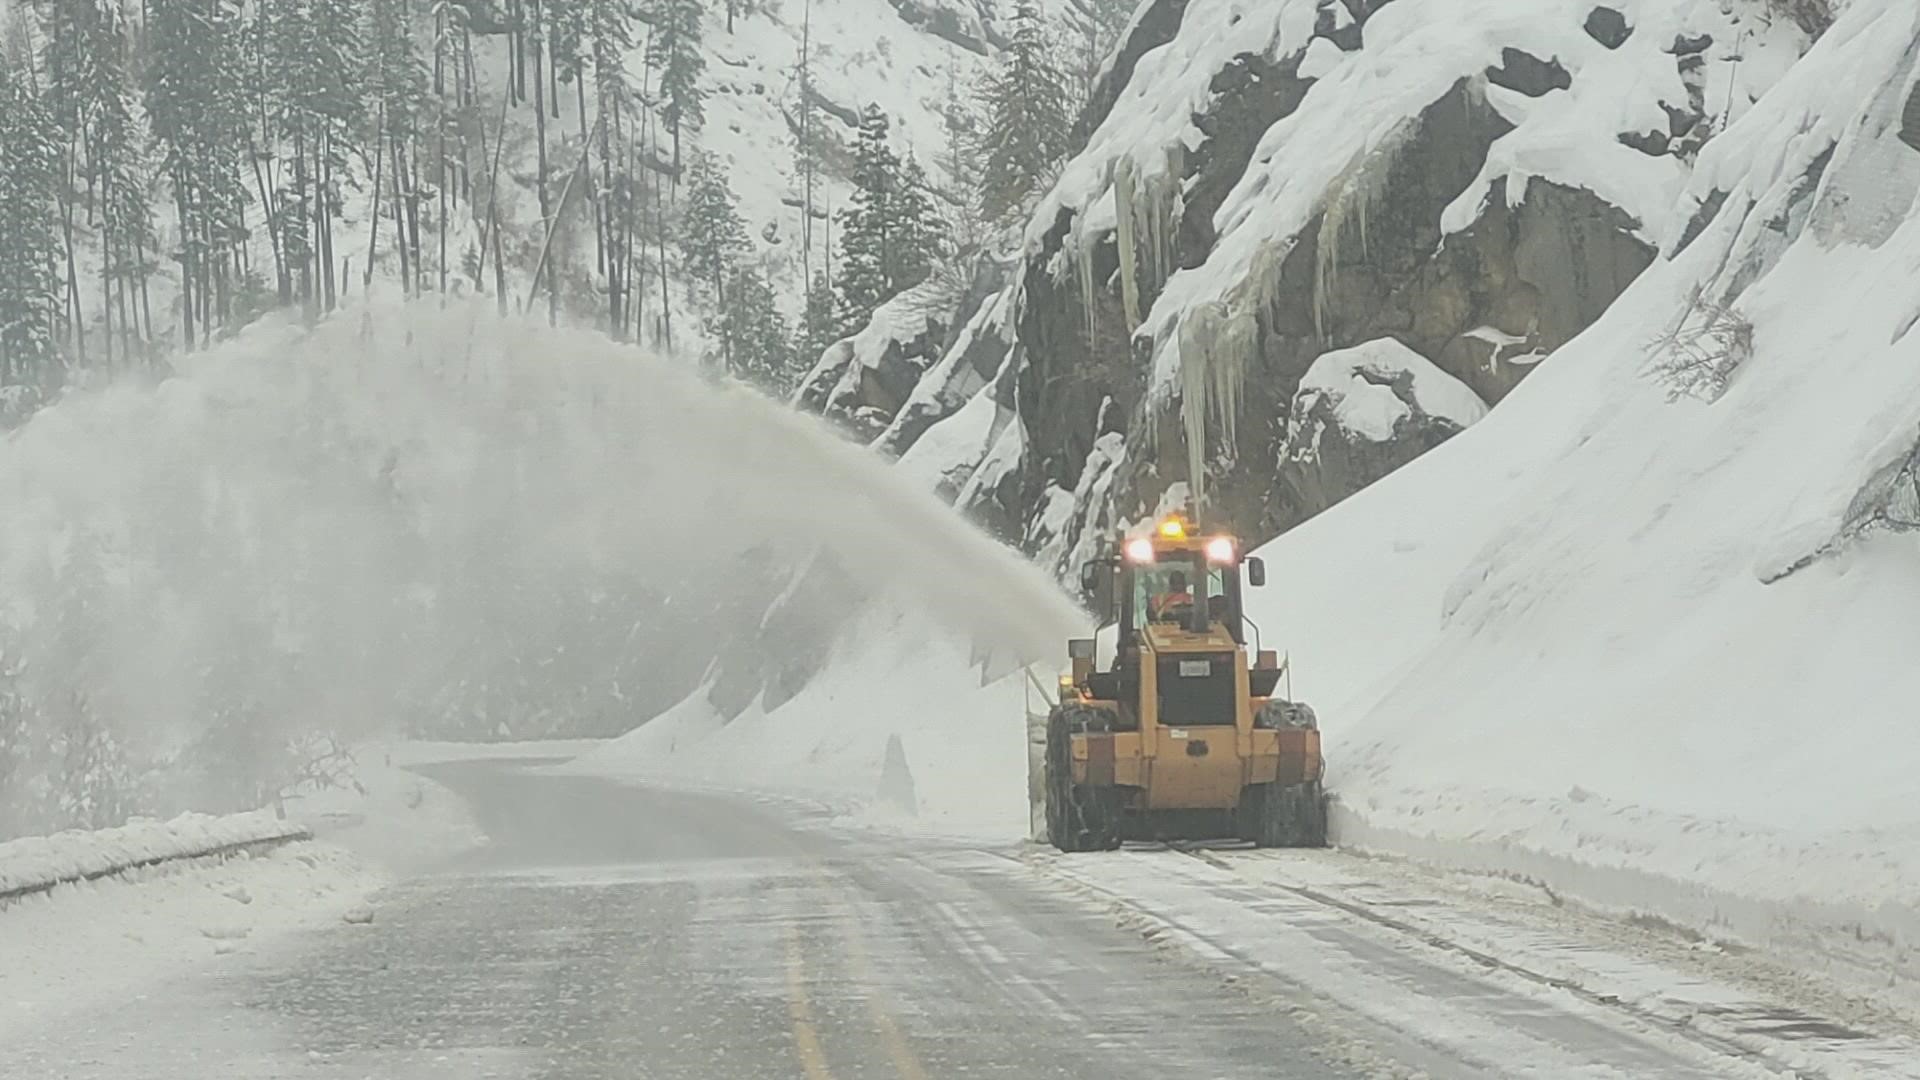 Stevens Pass on US 2 will likely remain closed Tuesday as crews work to remove ice from the roadway after freezing rain fell.